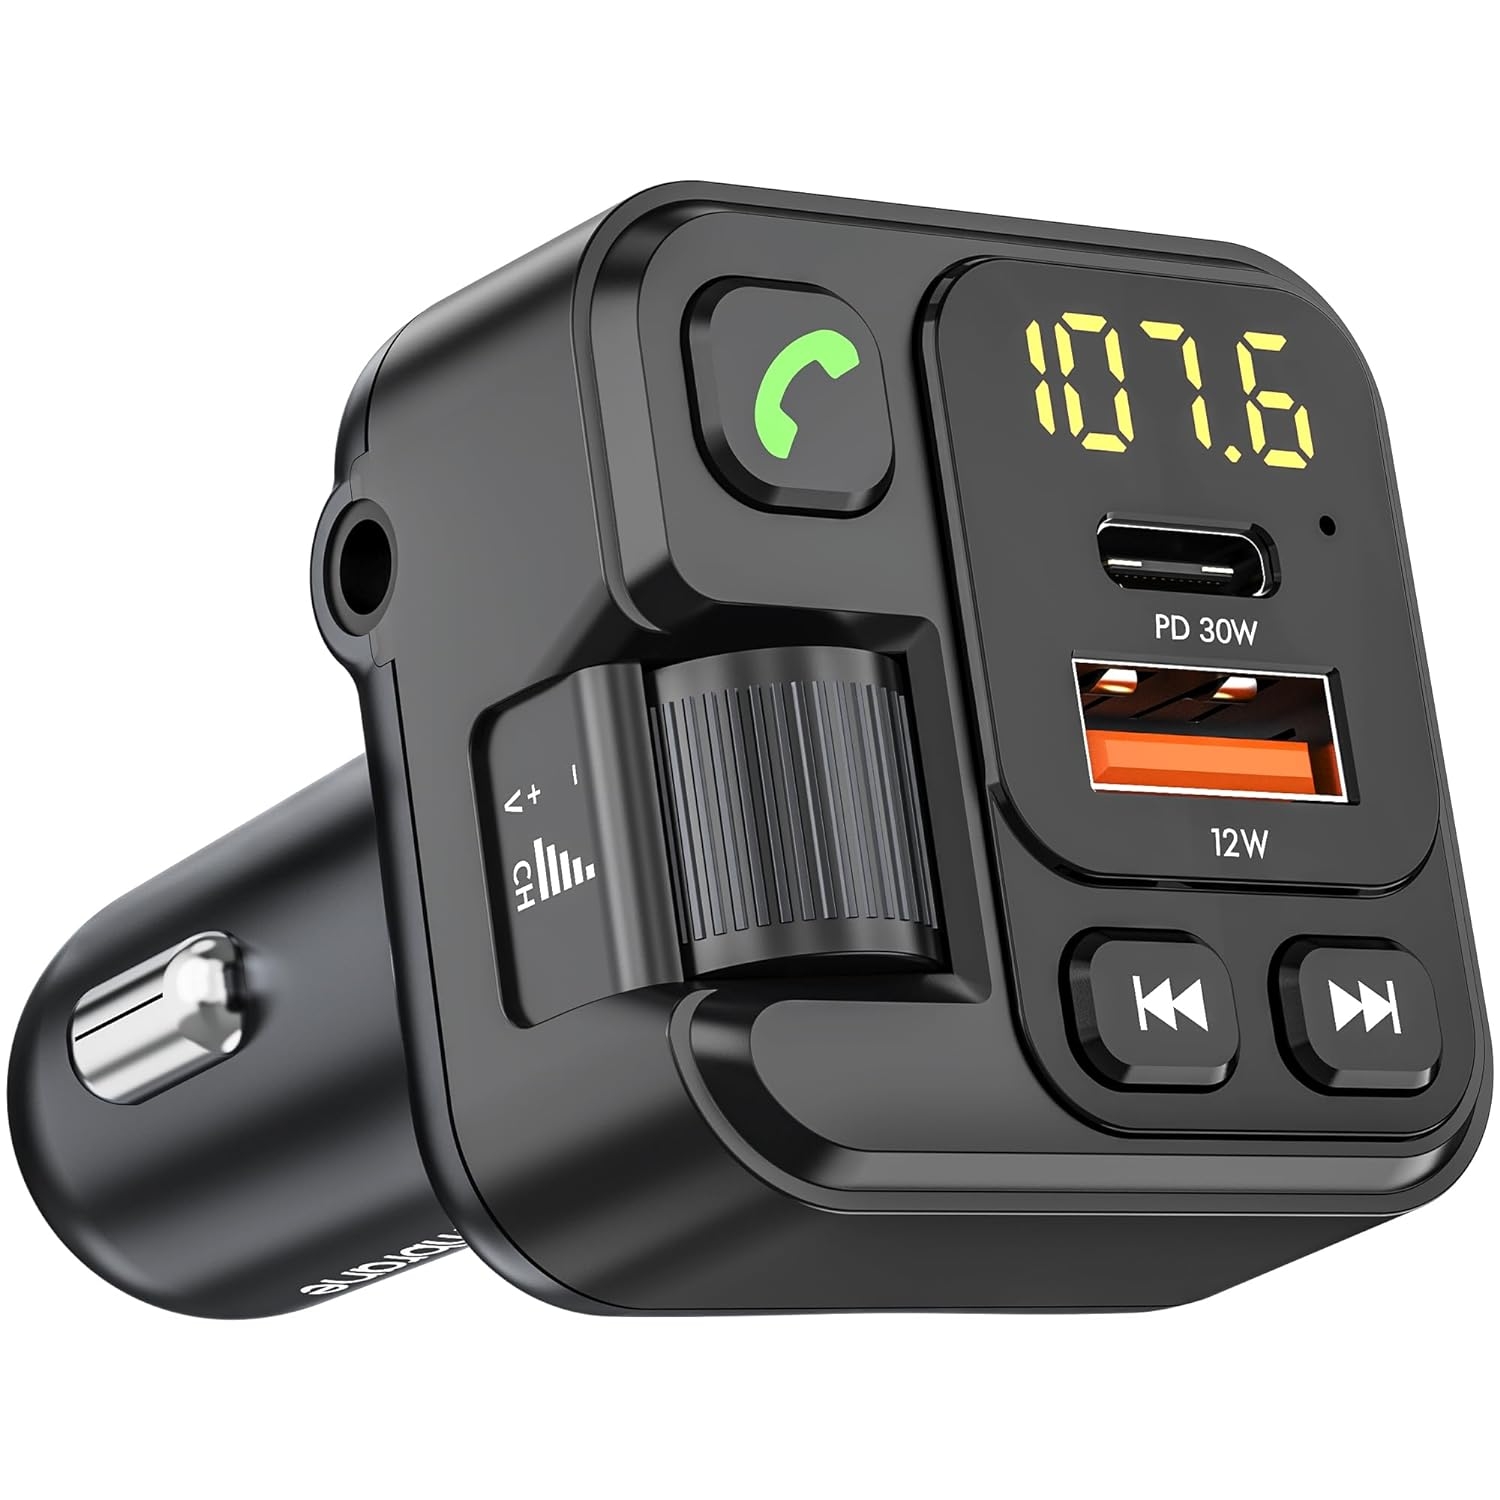 Ambrane Bluetooth FM Transmitter Car Radio Adapter for Hands-Free, Type-C (30W) PD Technology & USB-A (12W) Fast Charger, Music Stream